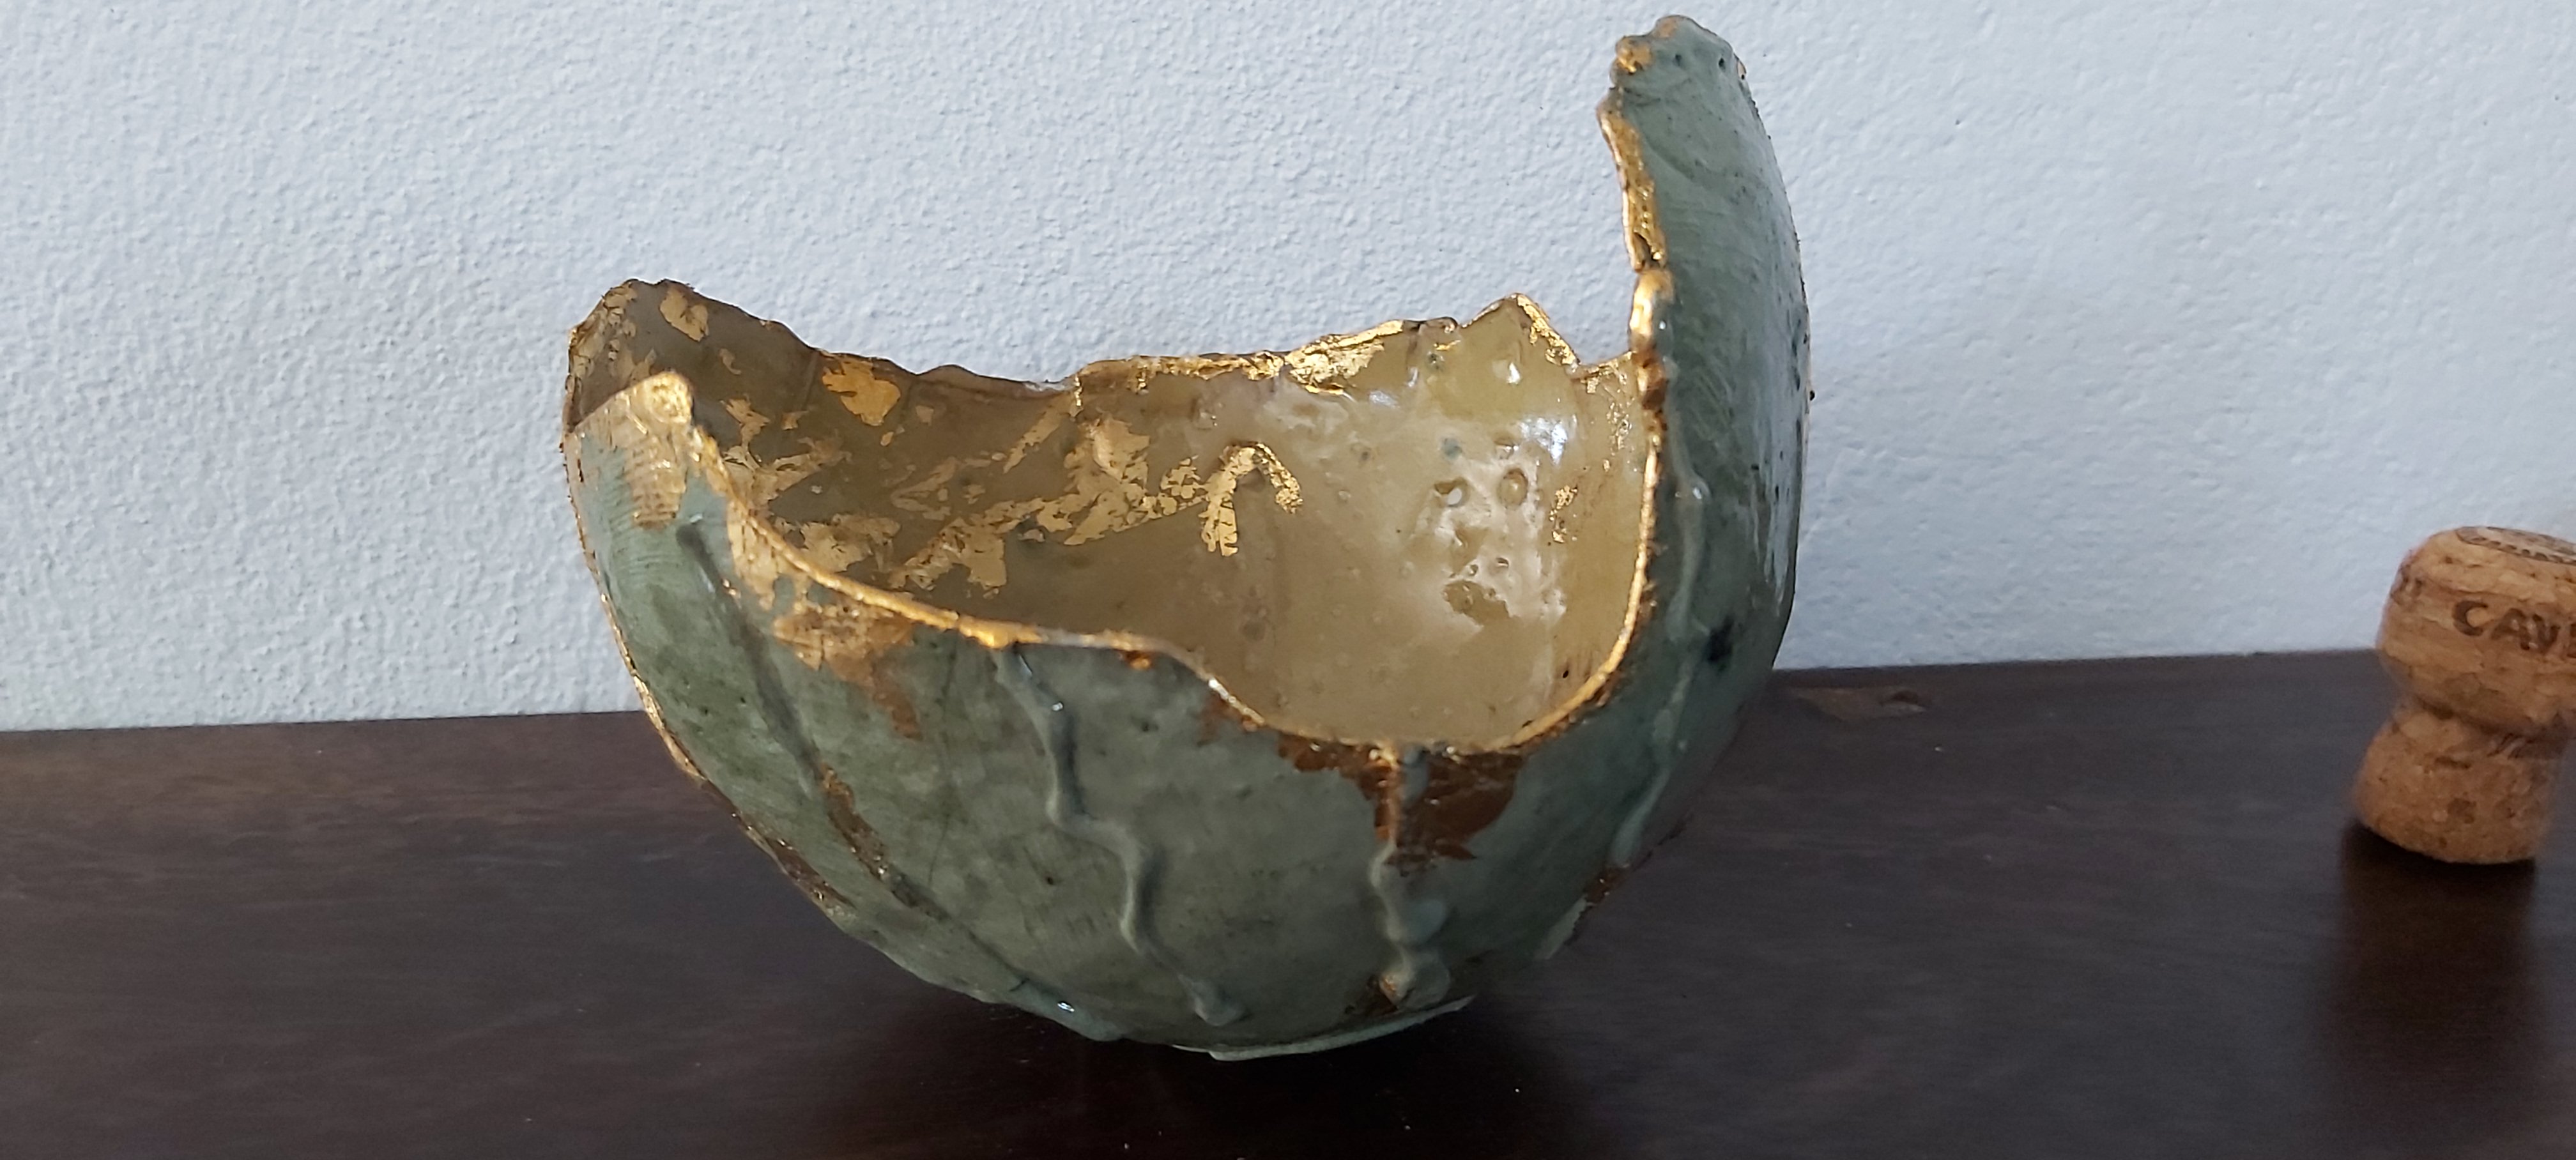 Grey/green porcelain bowl with gold detail